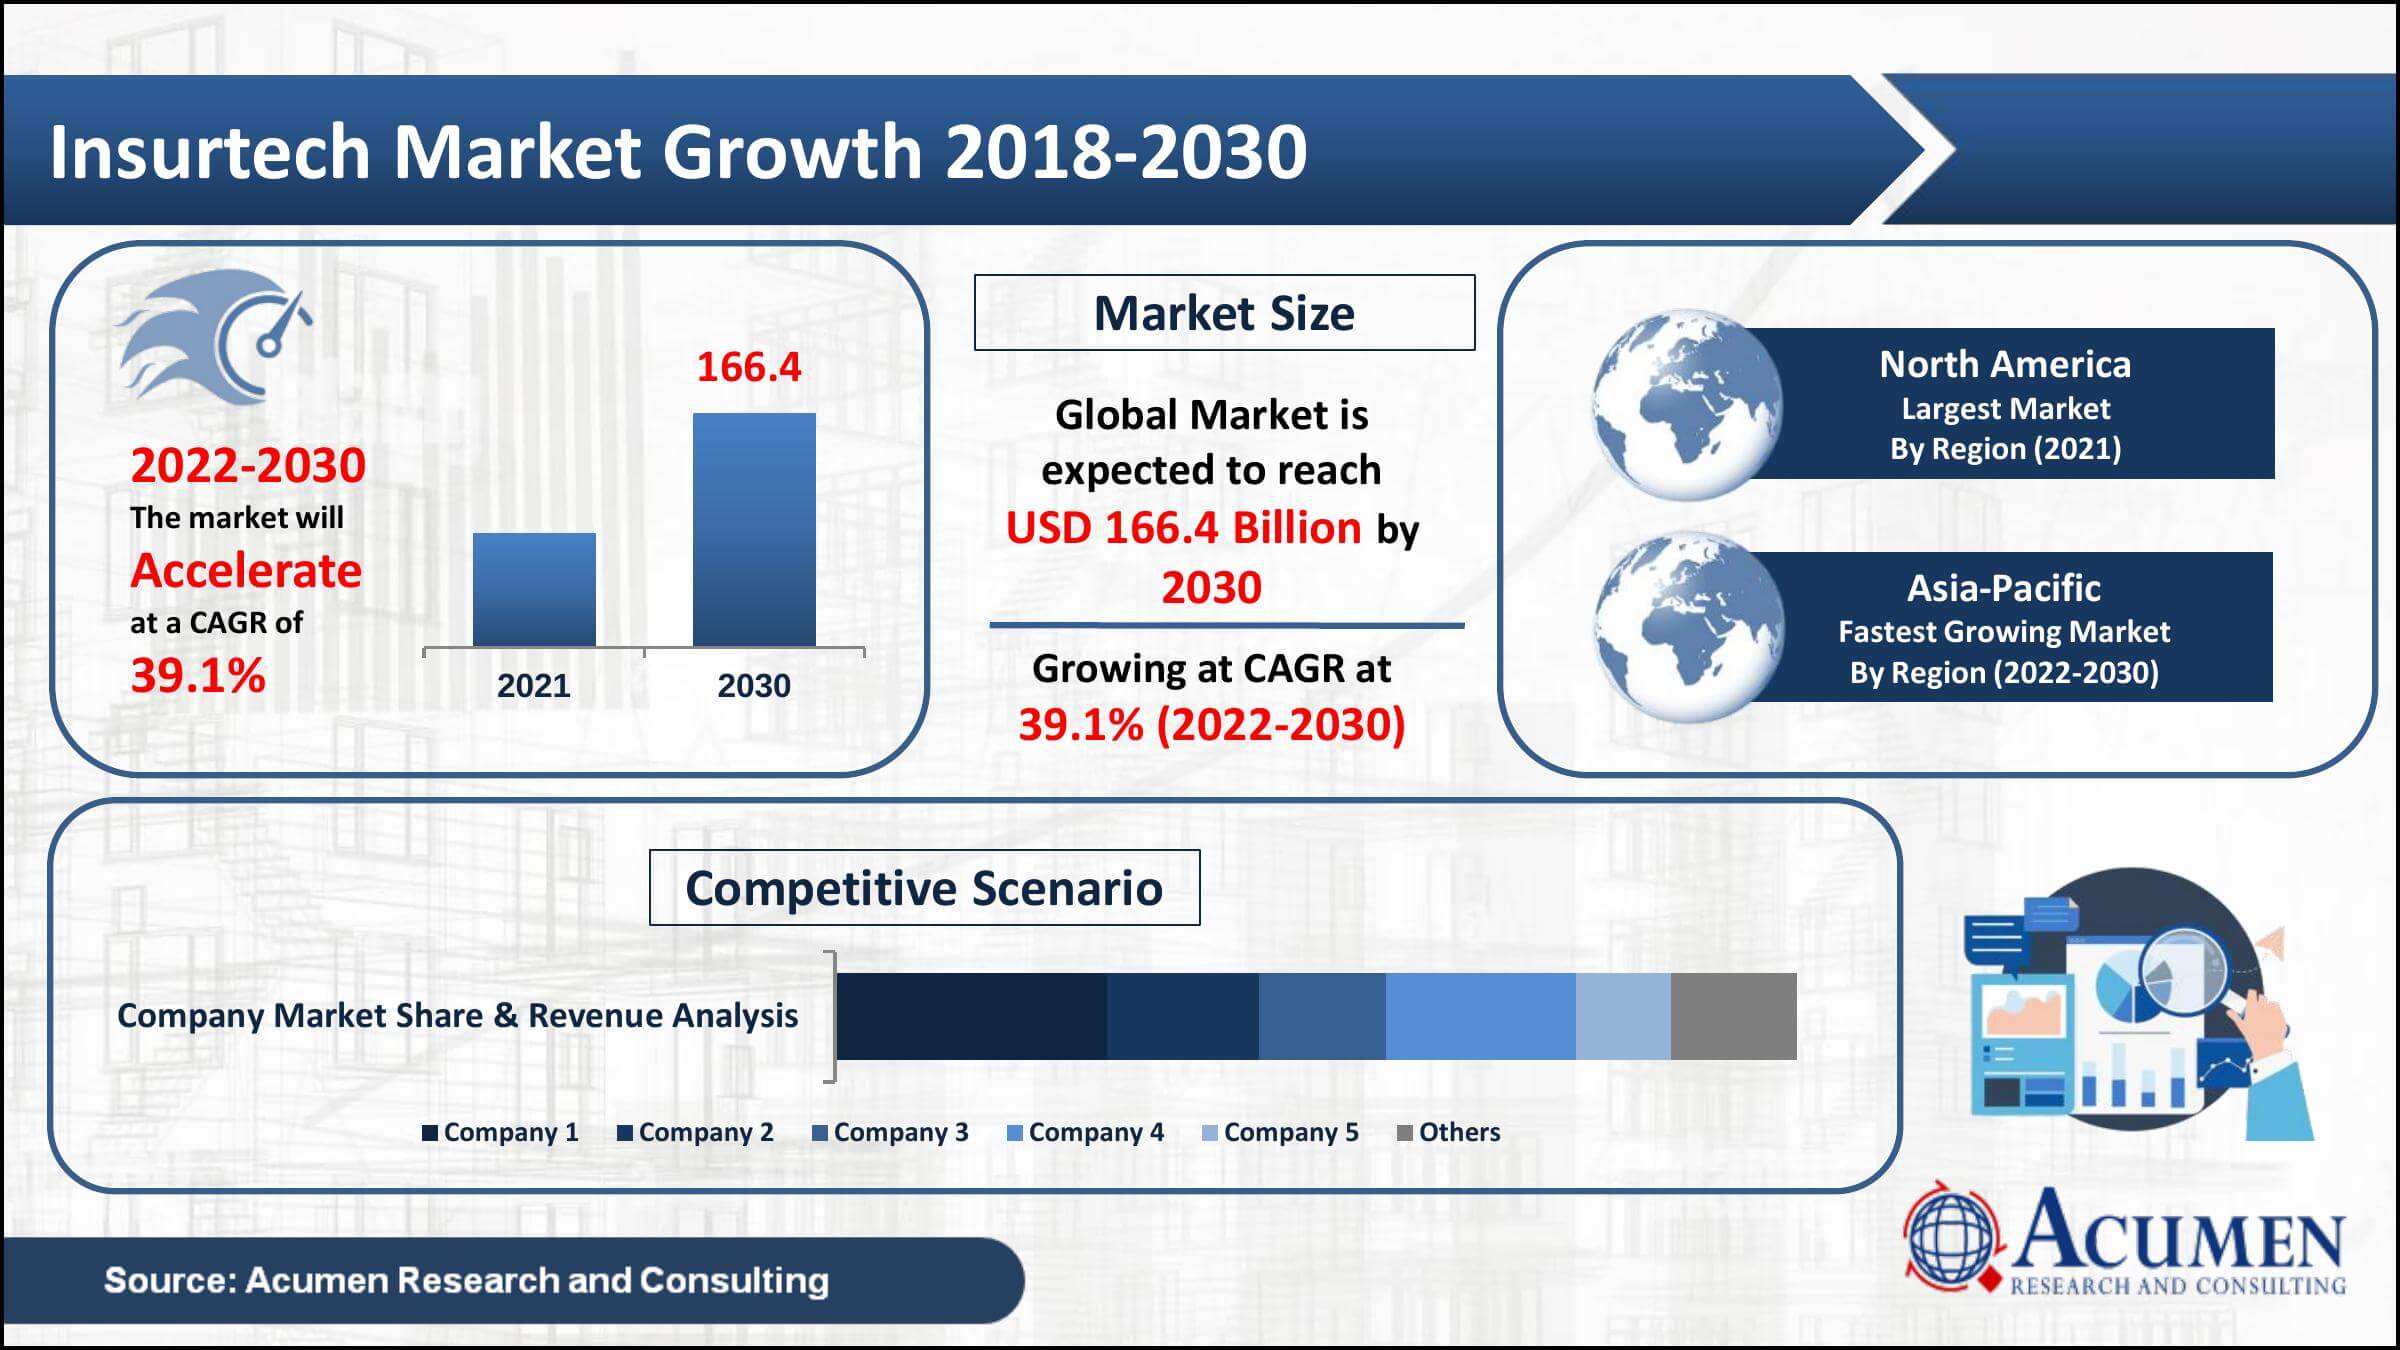 Insurtech Market value to reach USD 166.4 Billion by 2030 at CAGR of 39.1% as per Acumen Research and Consulting